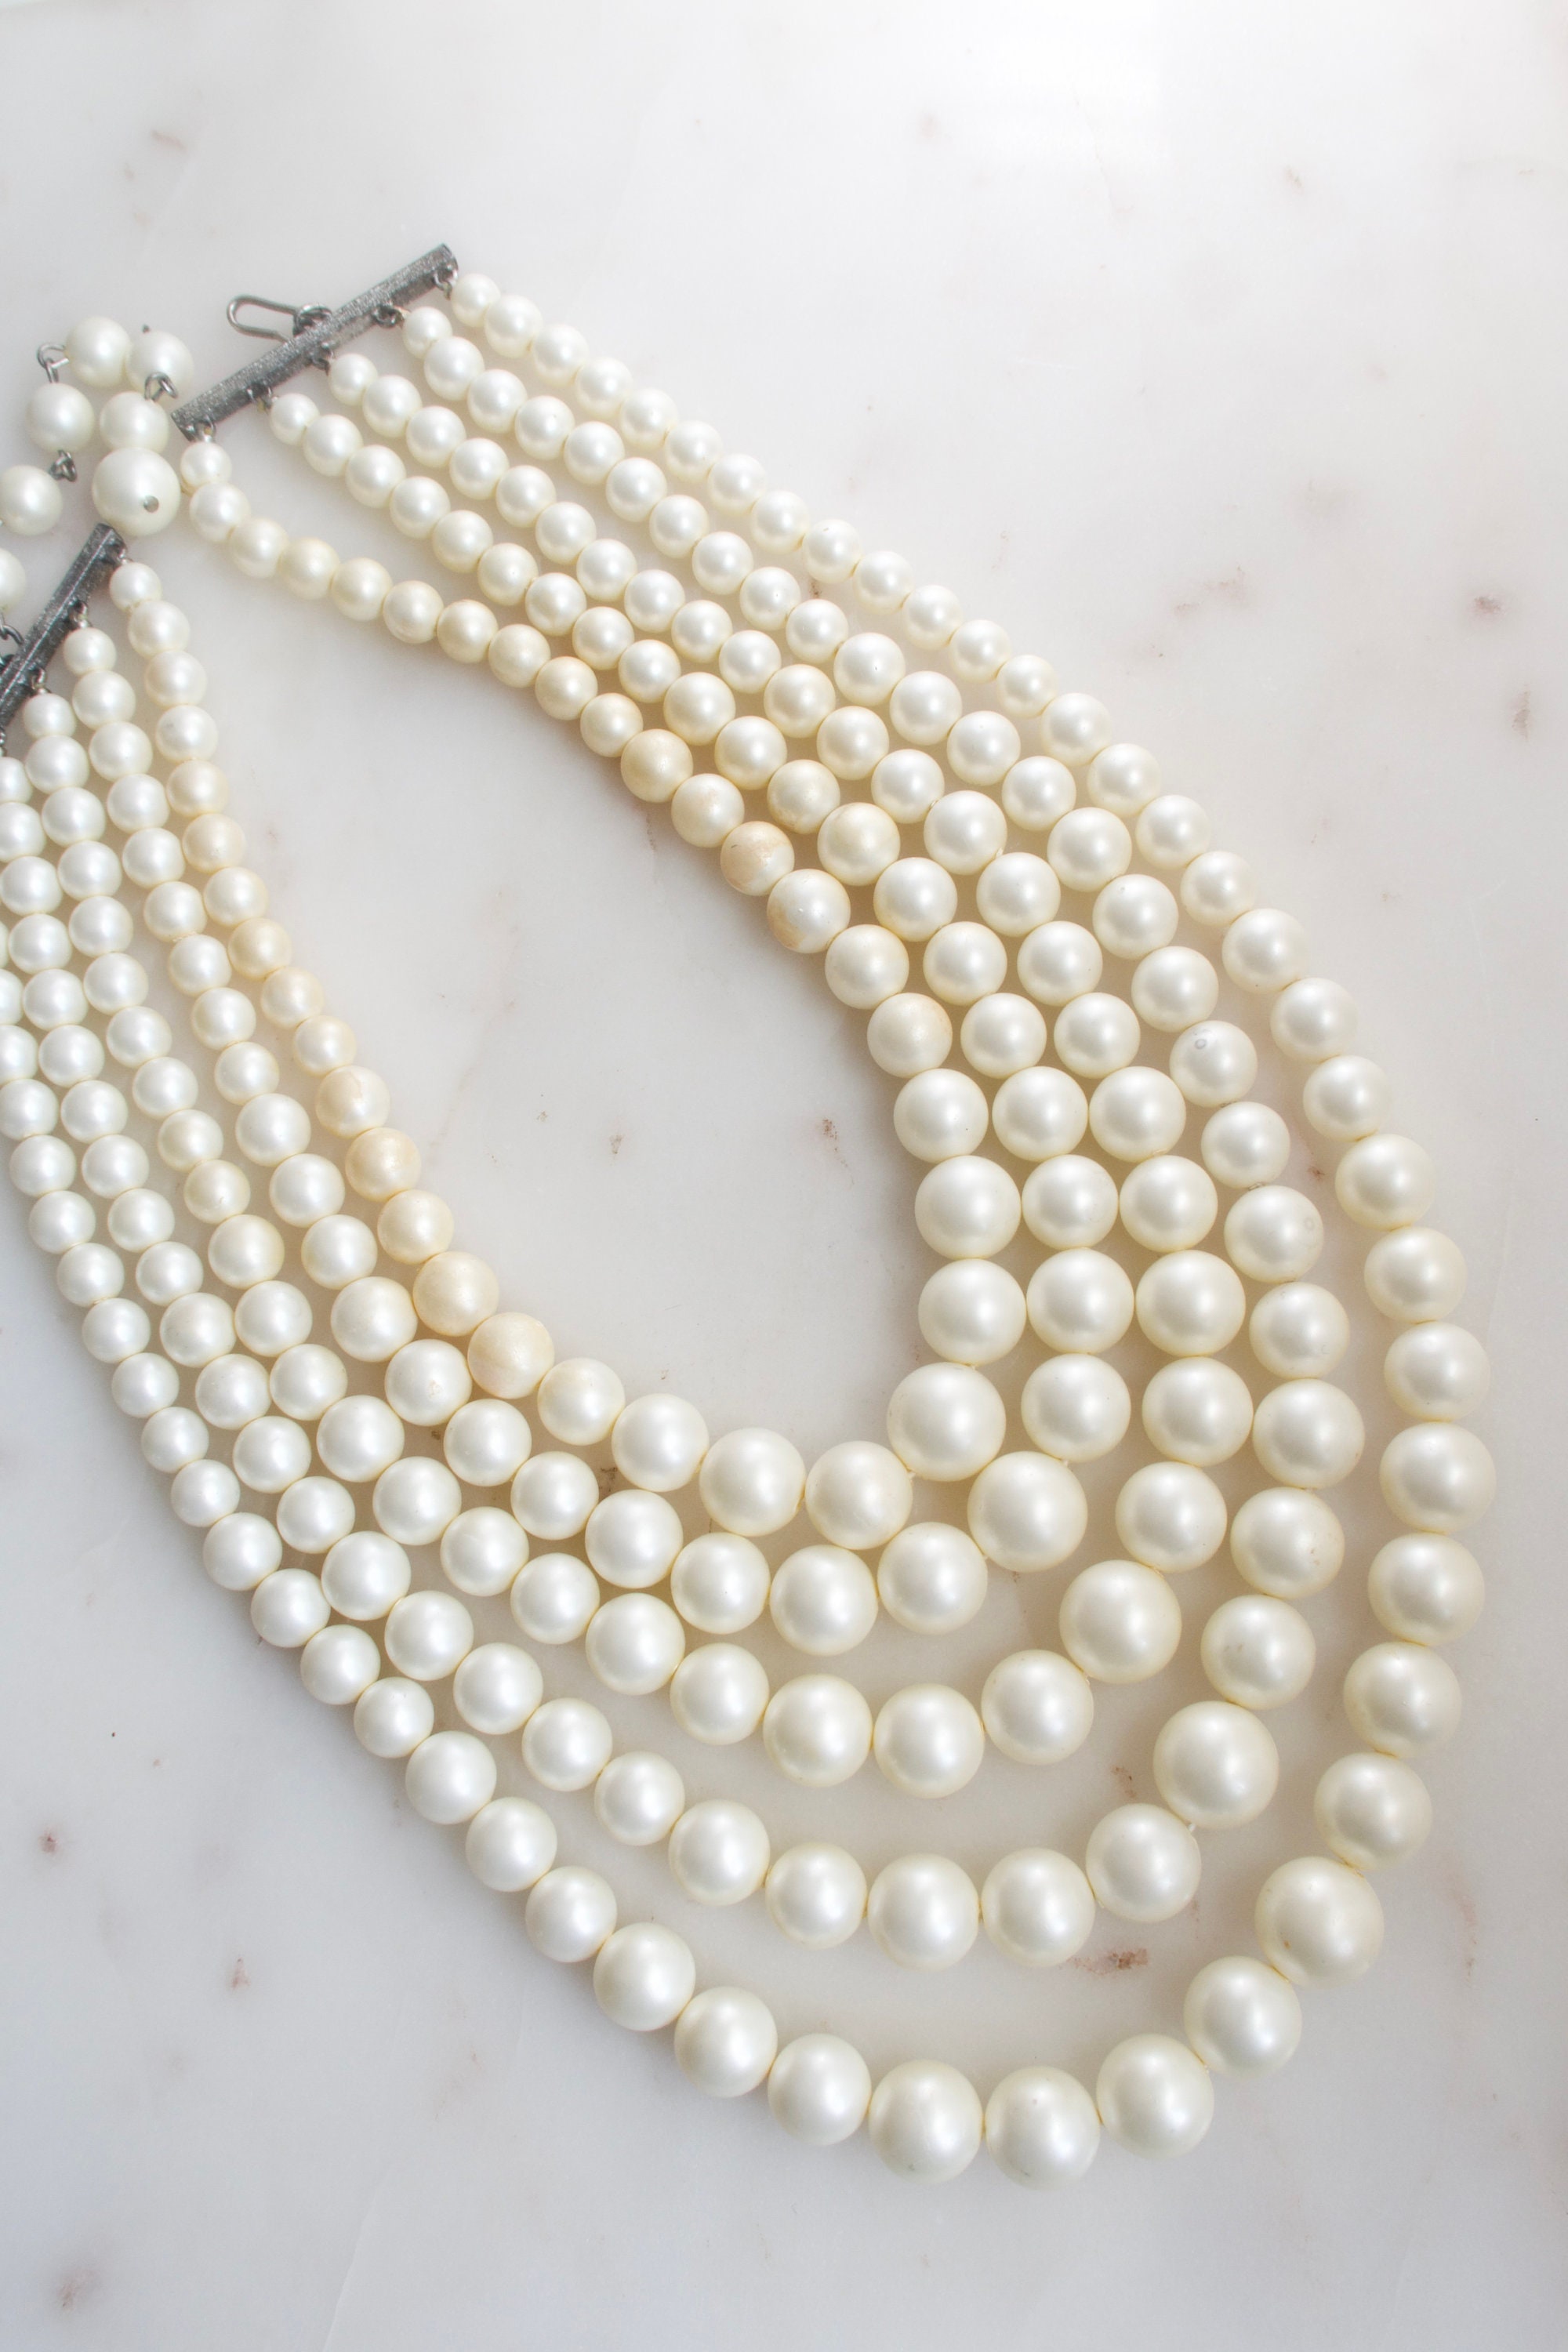 How Can You Tell If Pearls Are Real? - Brilliant Earth